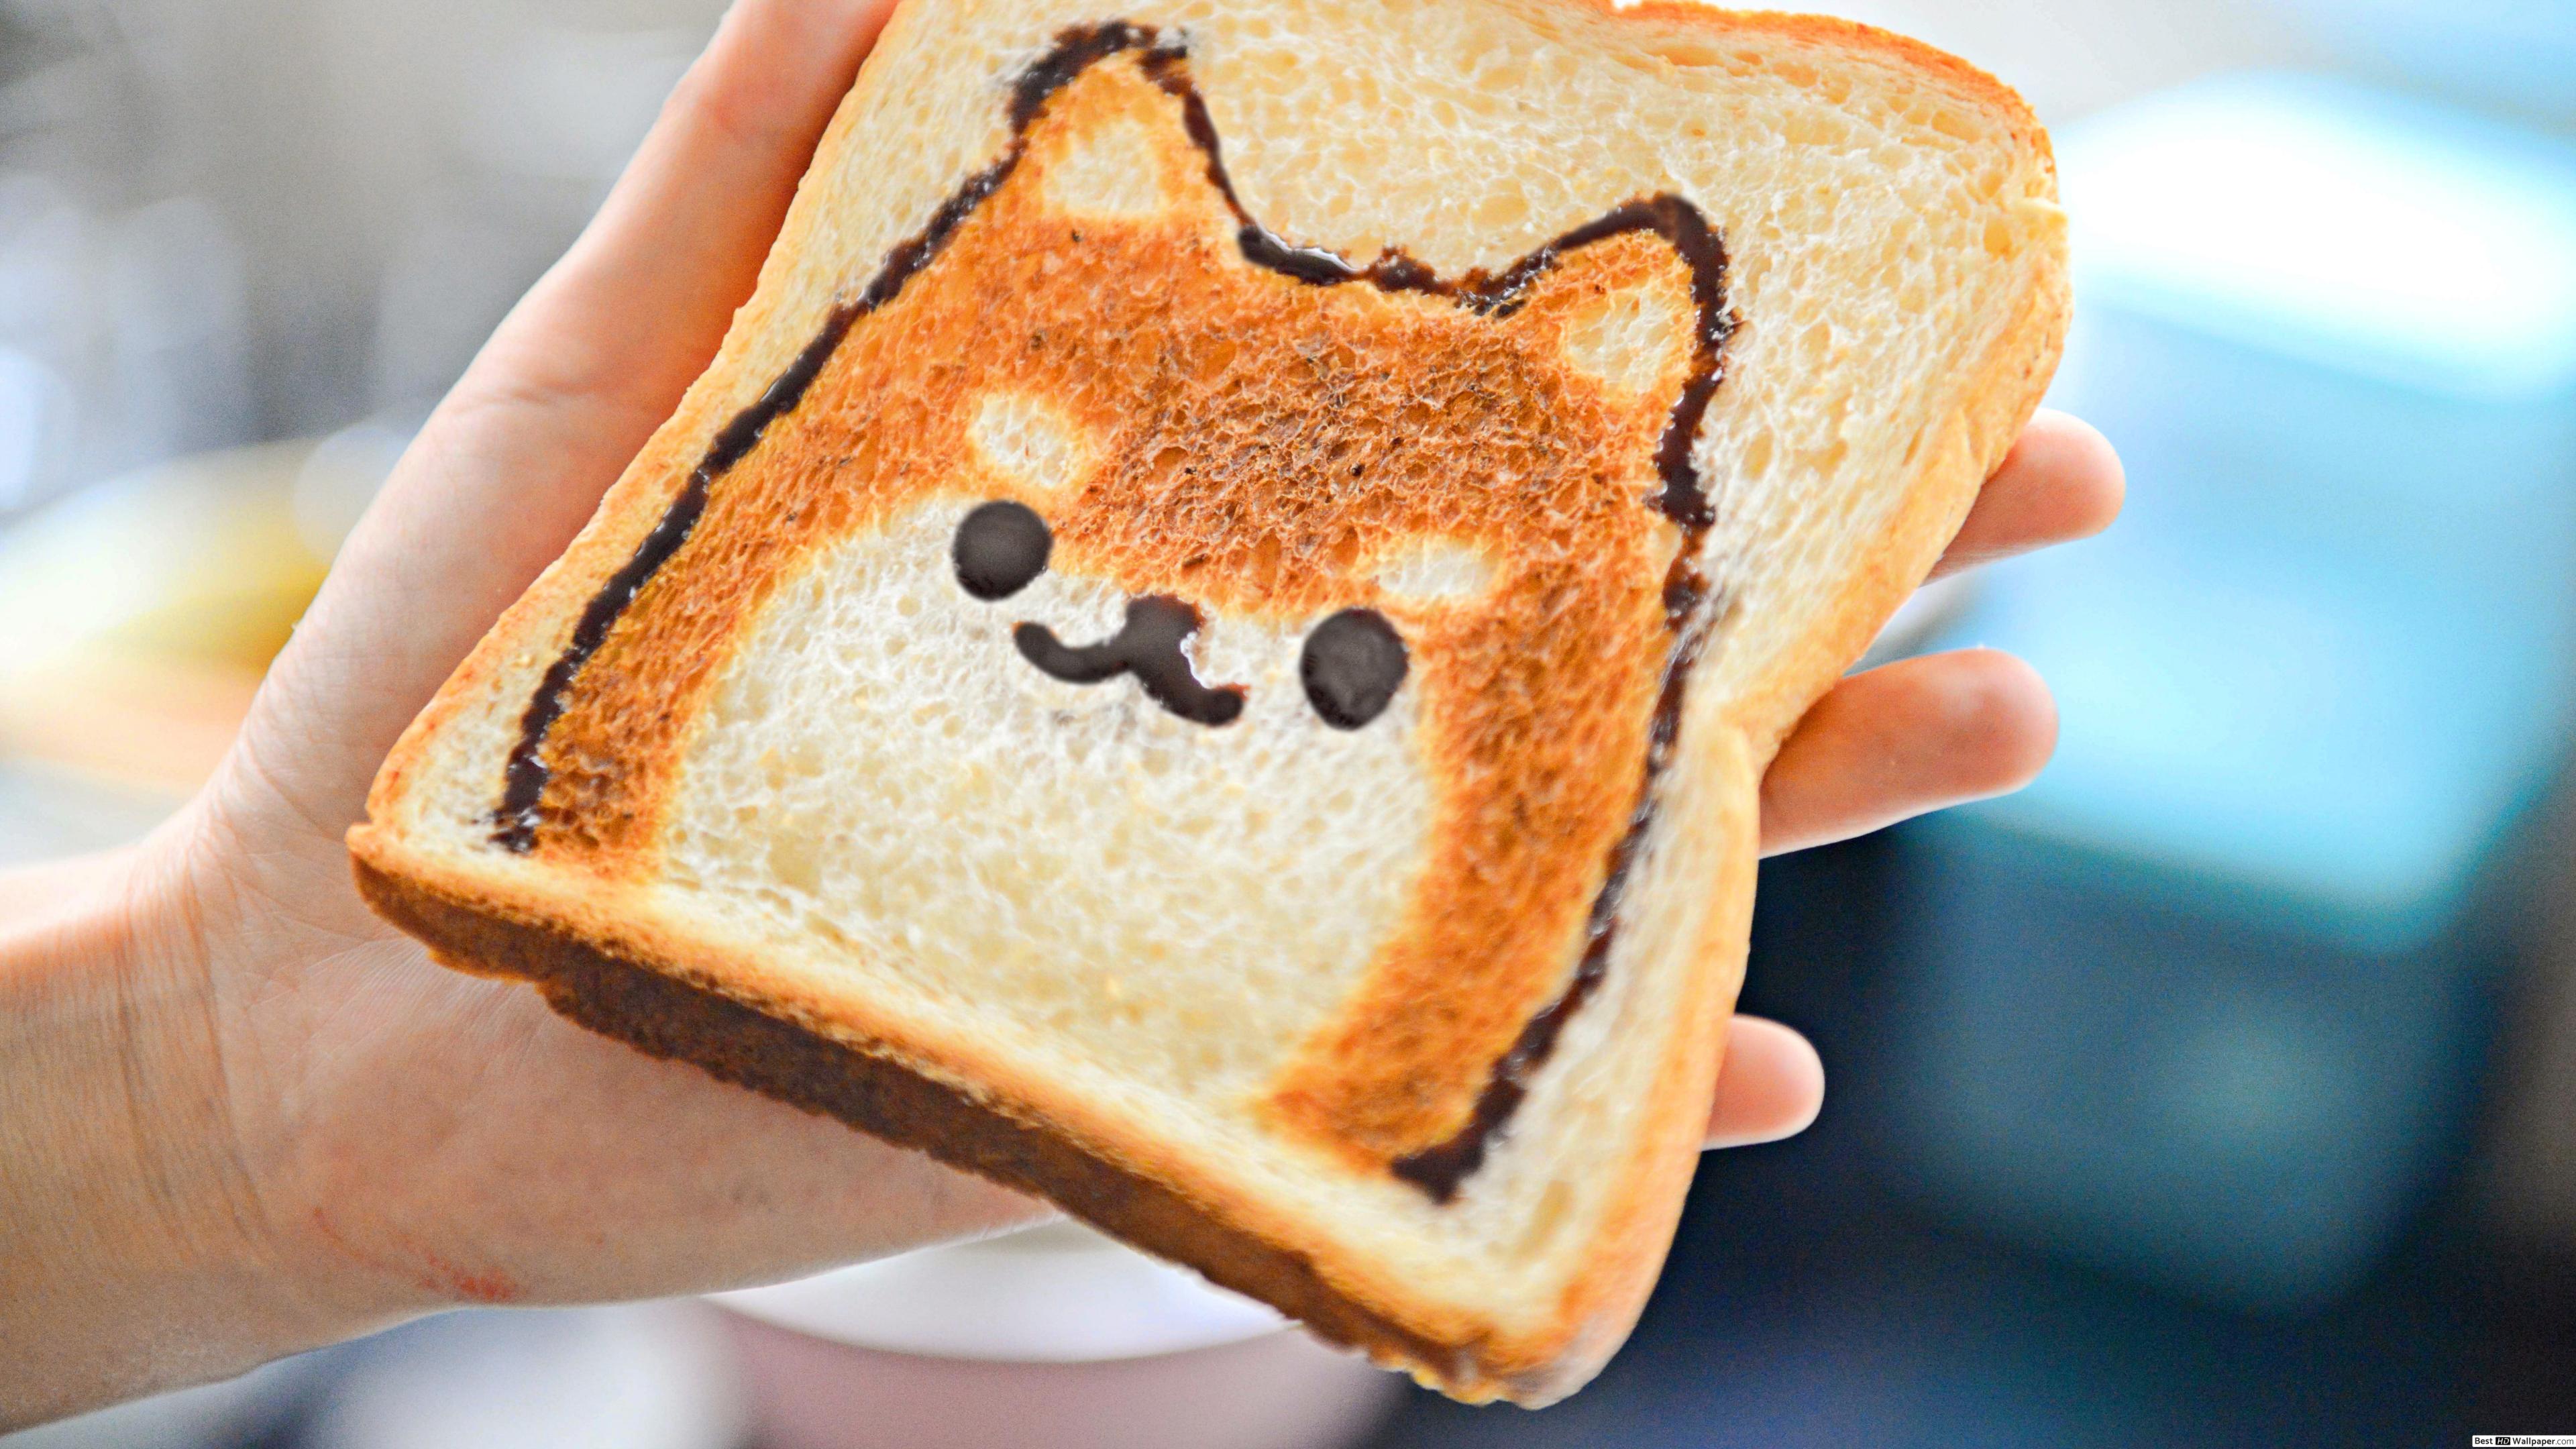 Cute toasted sliced bread with a puppy face art HD wallpaper download